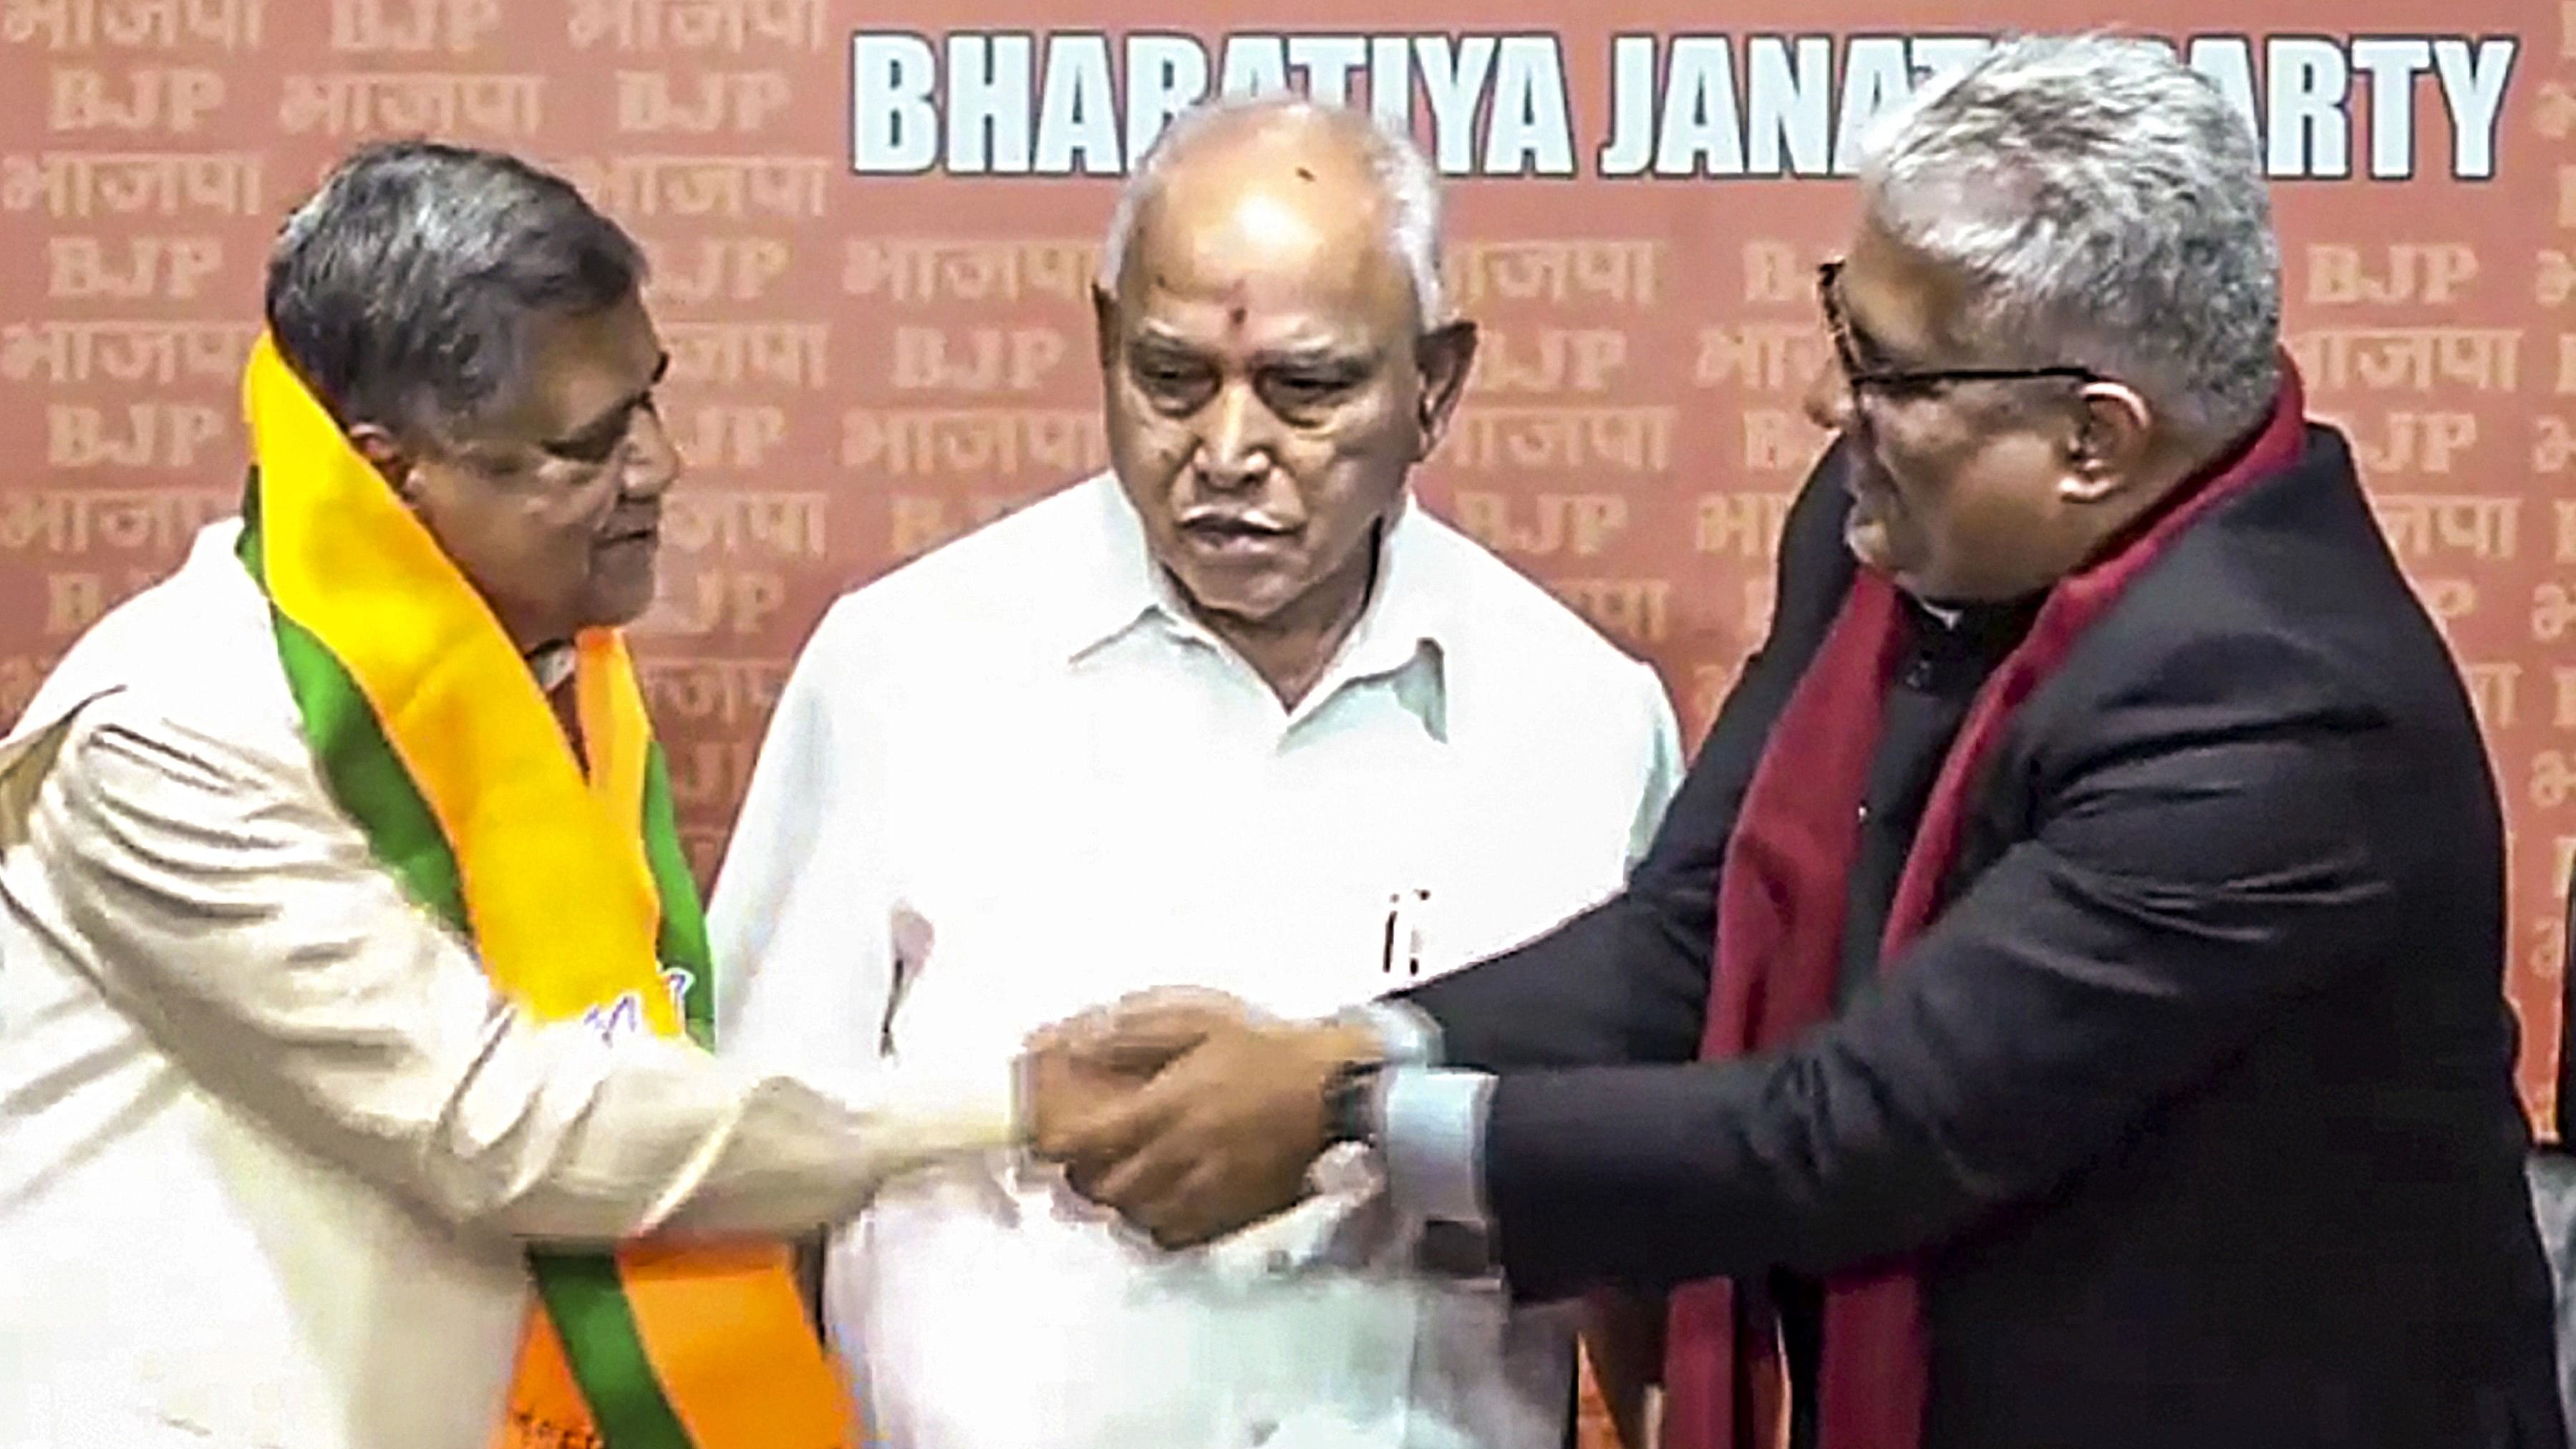 <div class="paragraphs"><p>Former Karnataka CM Jagadish Shettar, who joined the Congress last year before the Karnataka assembly election, rejoins BJP in the presence of party leaders BS Yediyrappa and Bhuendra Yadav, in New Delhi.&nbsp;</p></div>